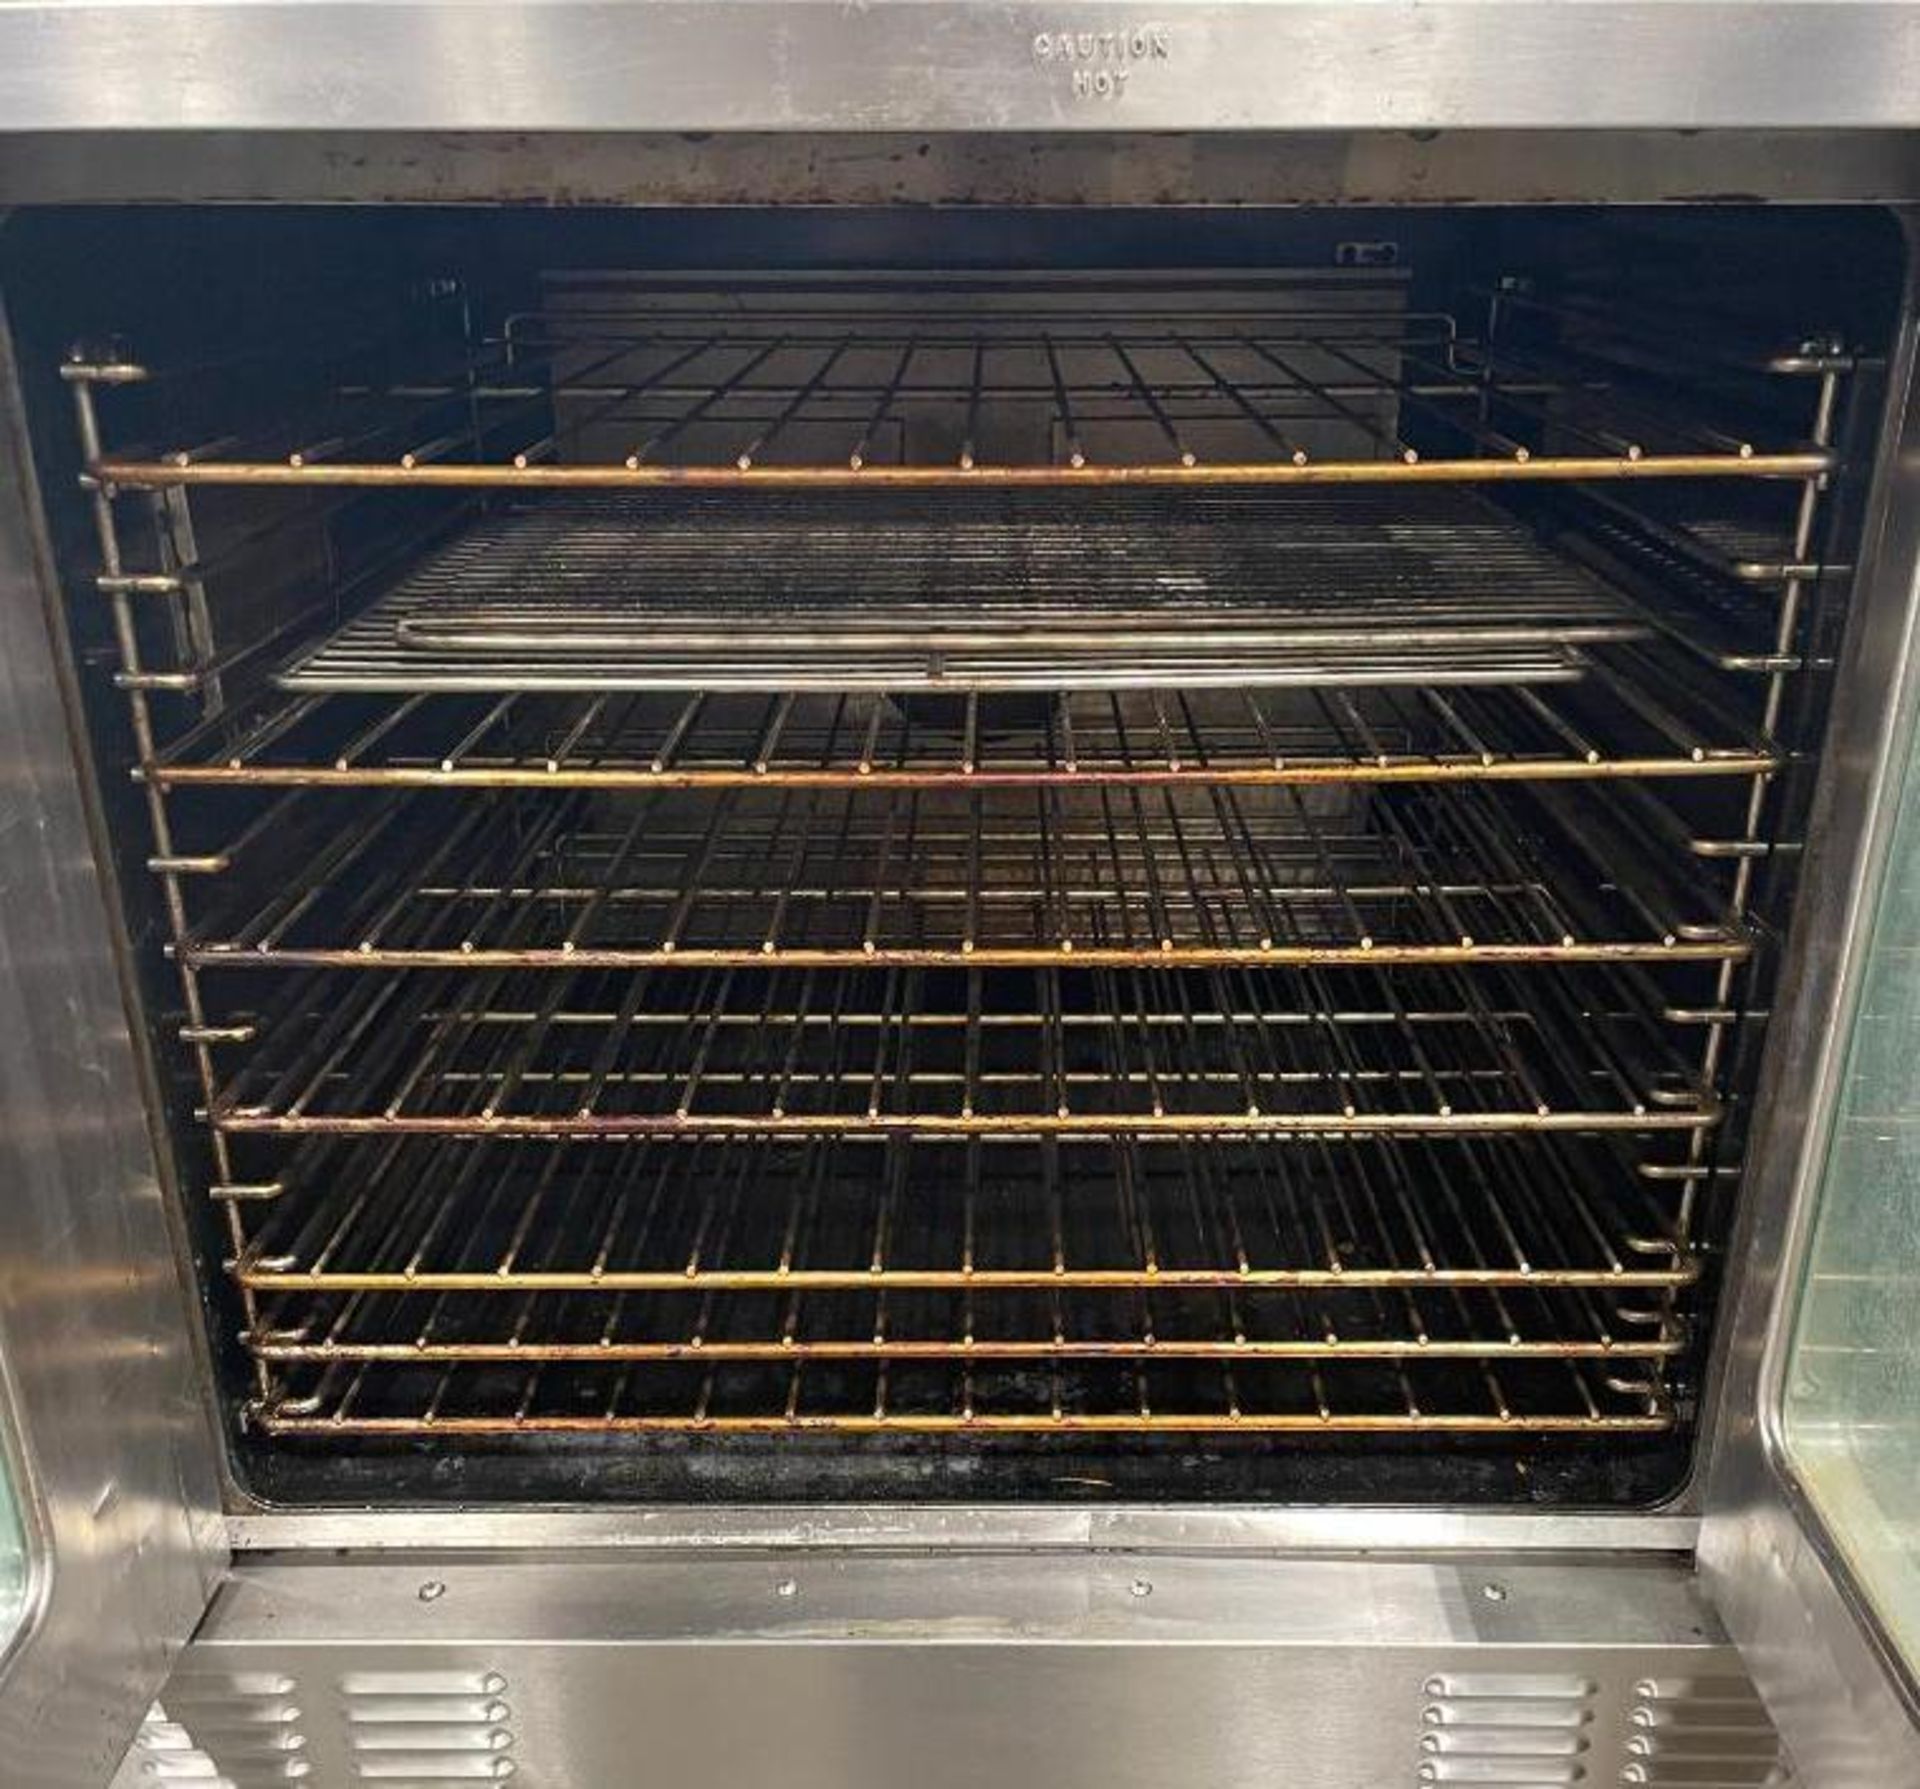 GARLAND MASTER 200 GAS CONVECTION OVEN - Image 4 of 11